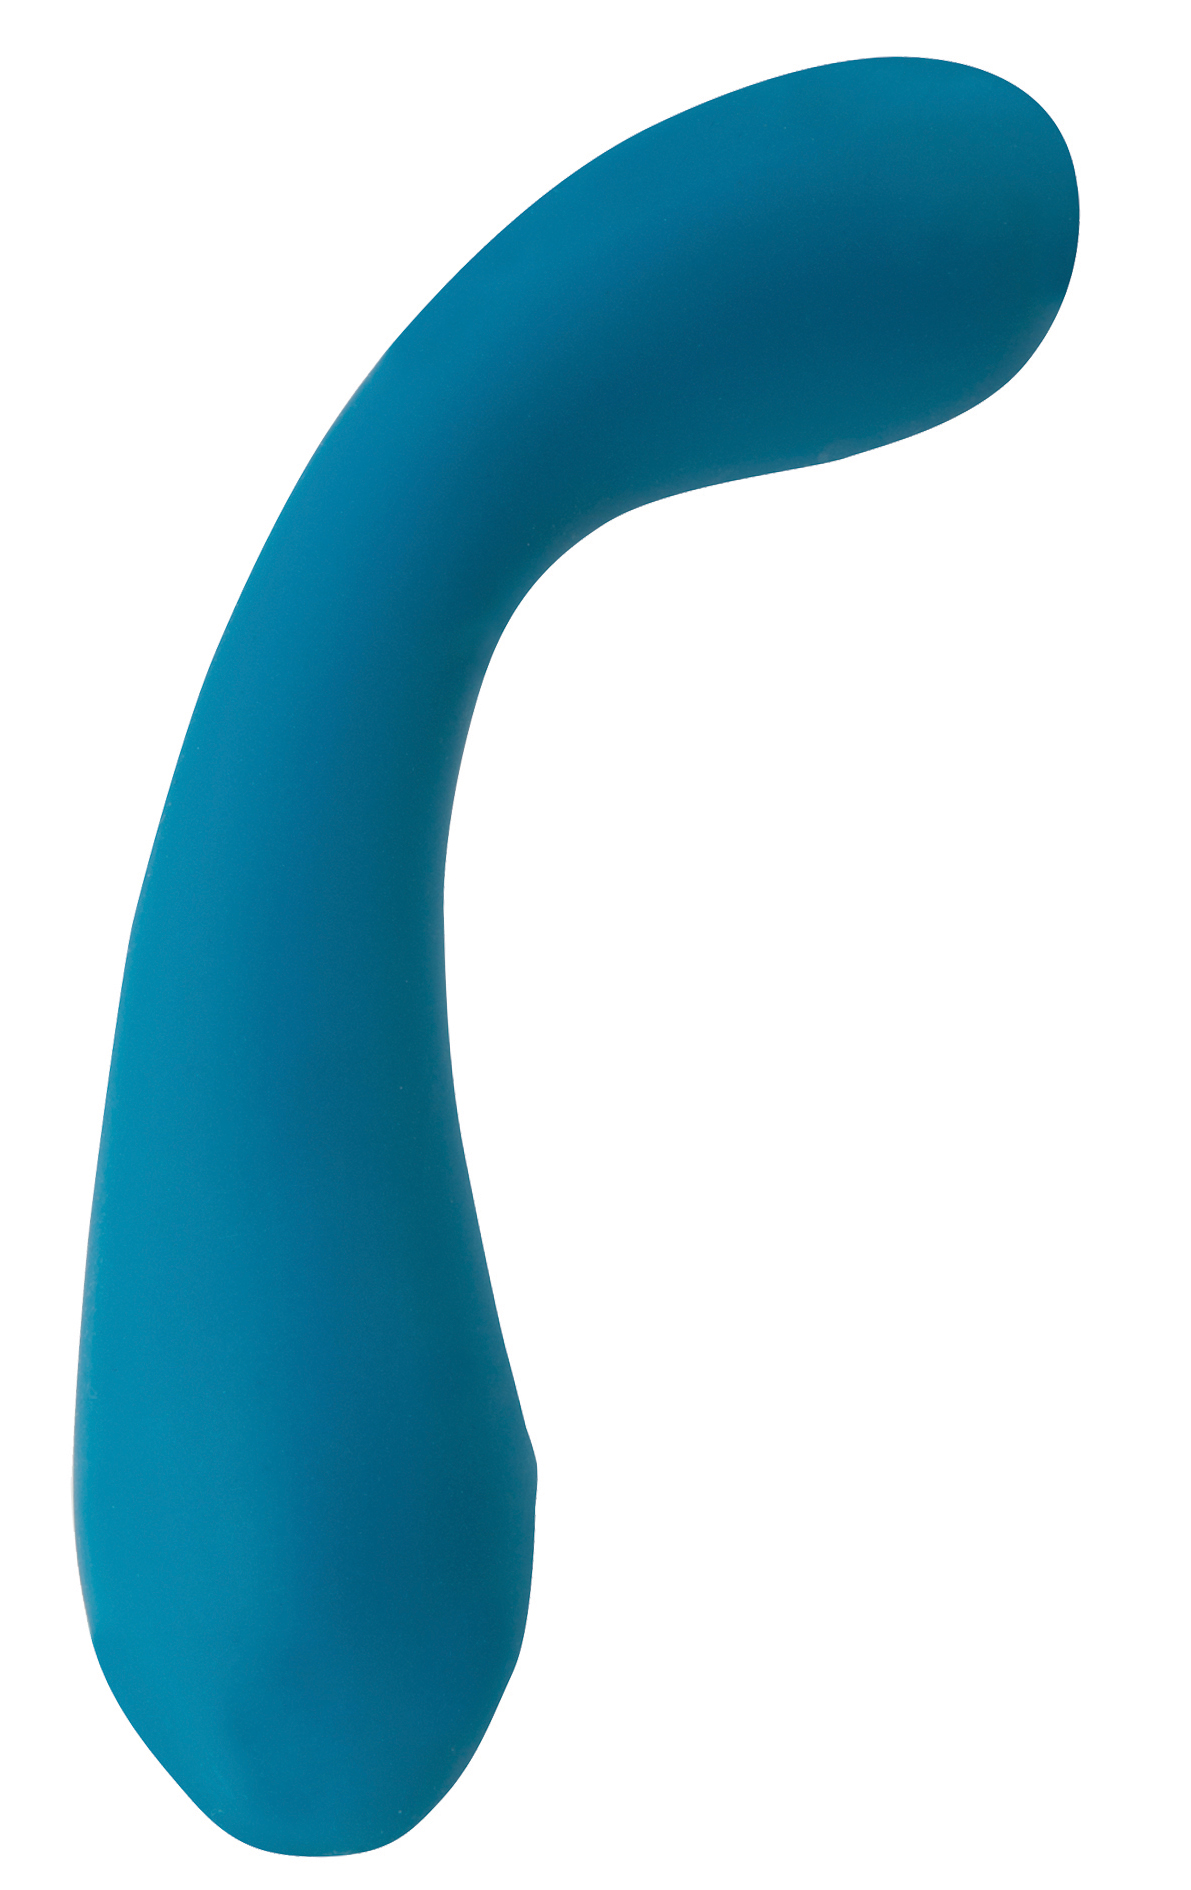 SQUEEZE CONTROL - The Swan Curve teal